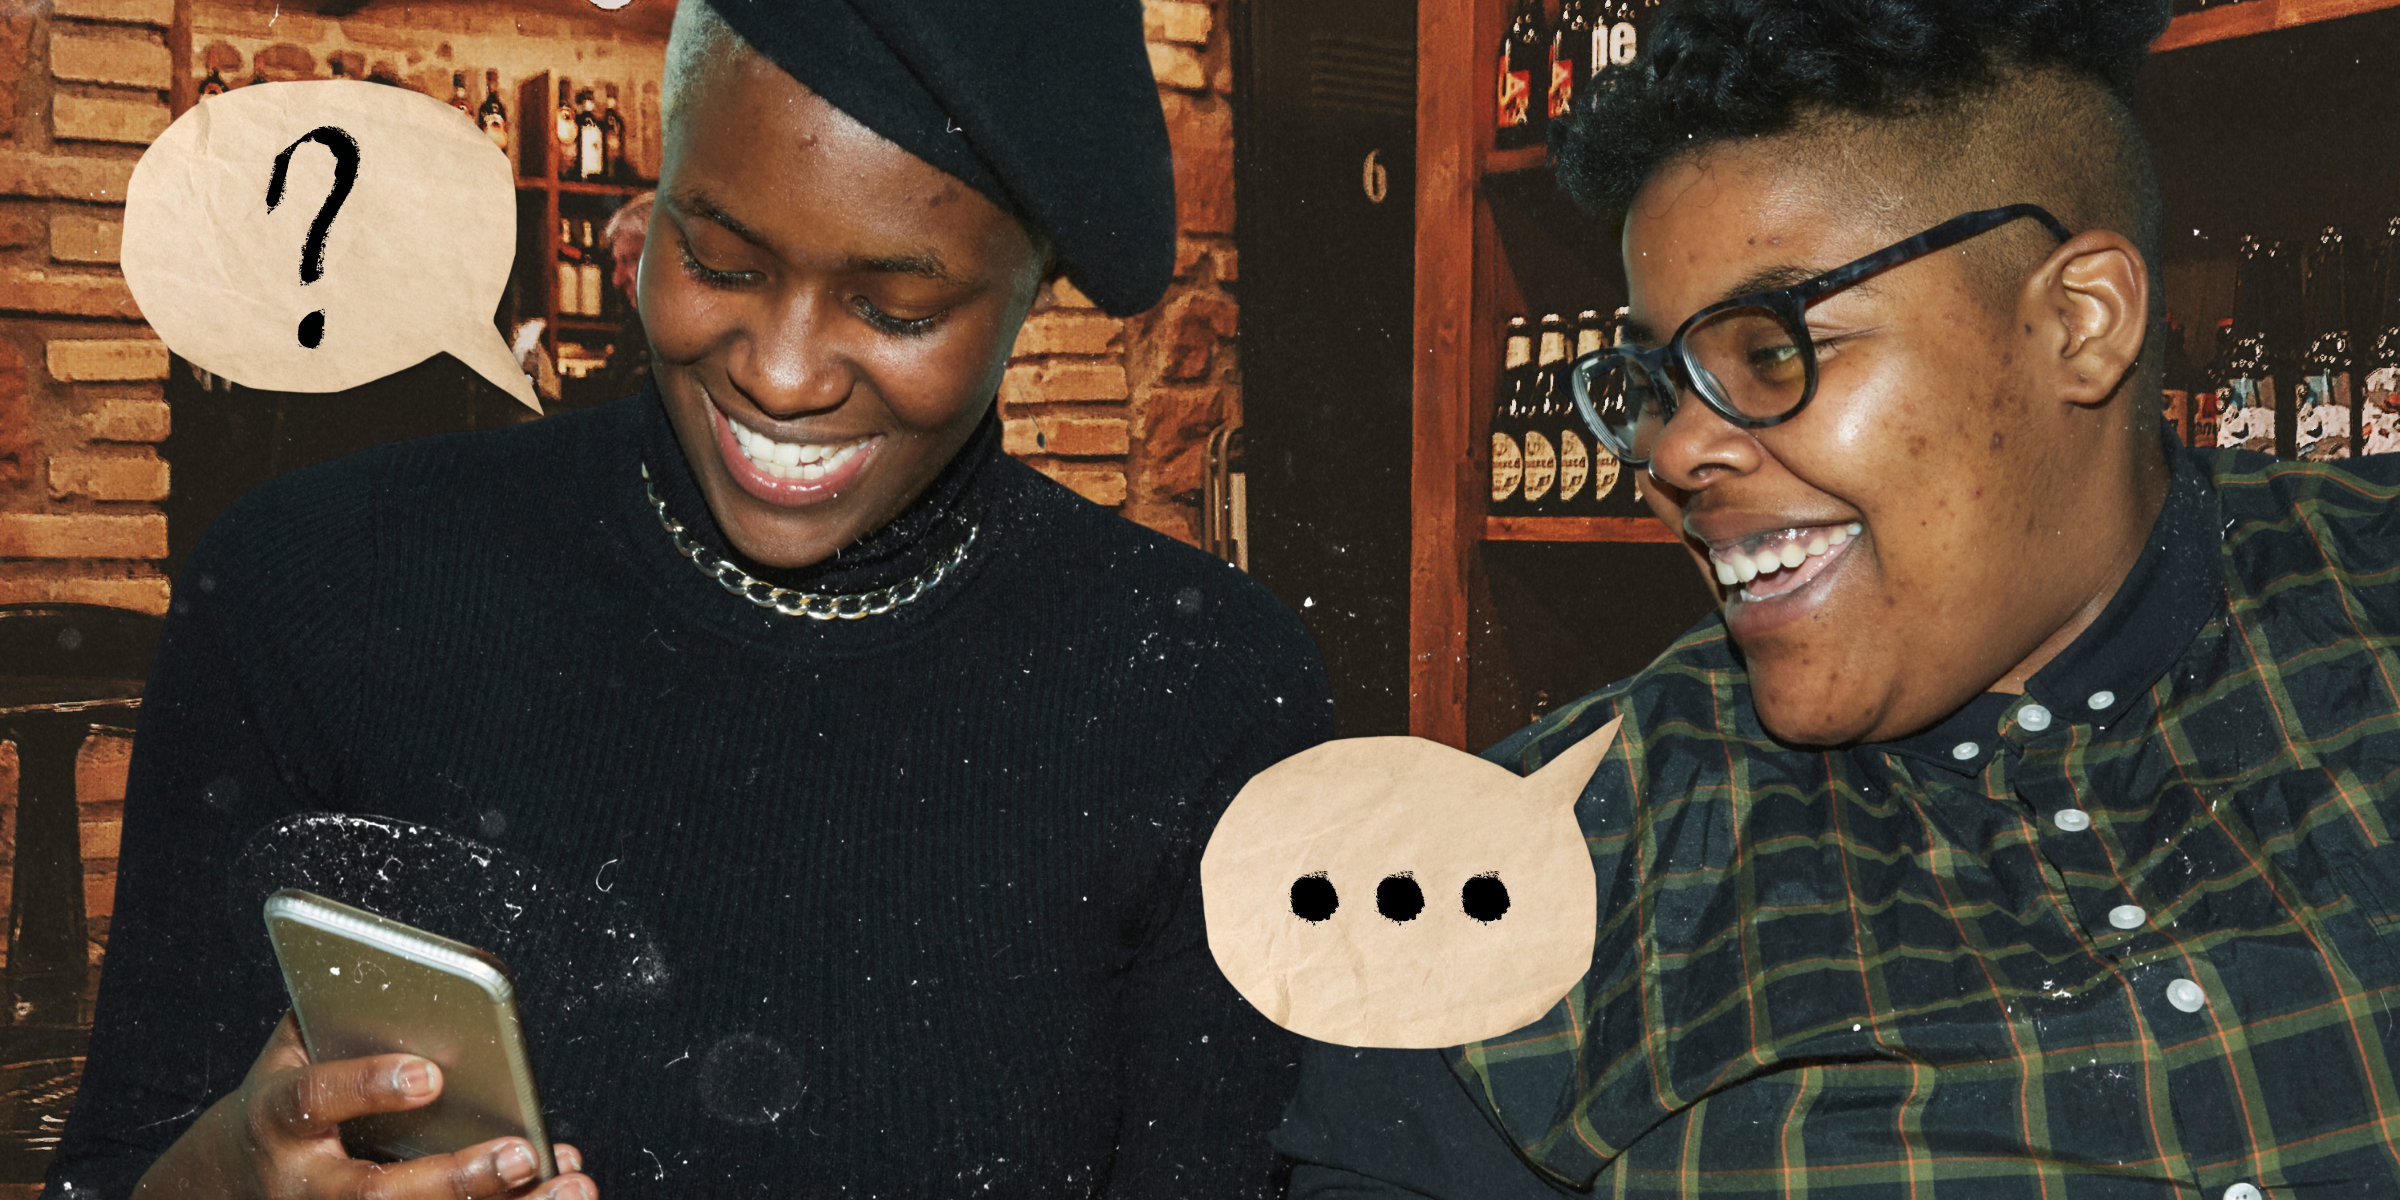 two Black women are smiling while asking each other questions on a first date